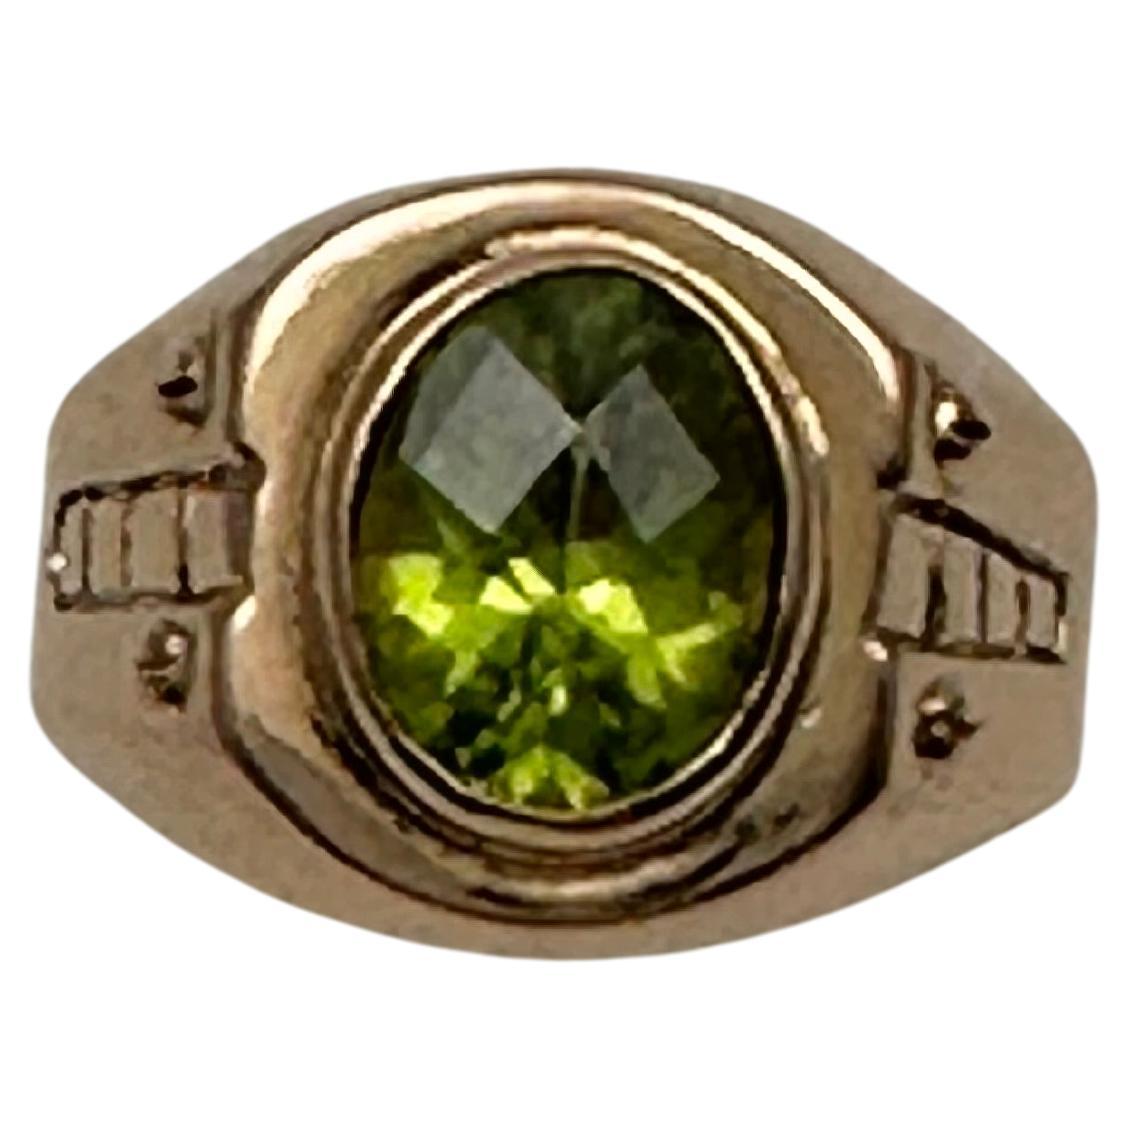 21kt Yellow Gold 8mm x 9mm Oval Peridot Ring Size 5 3/4